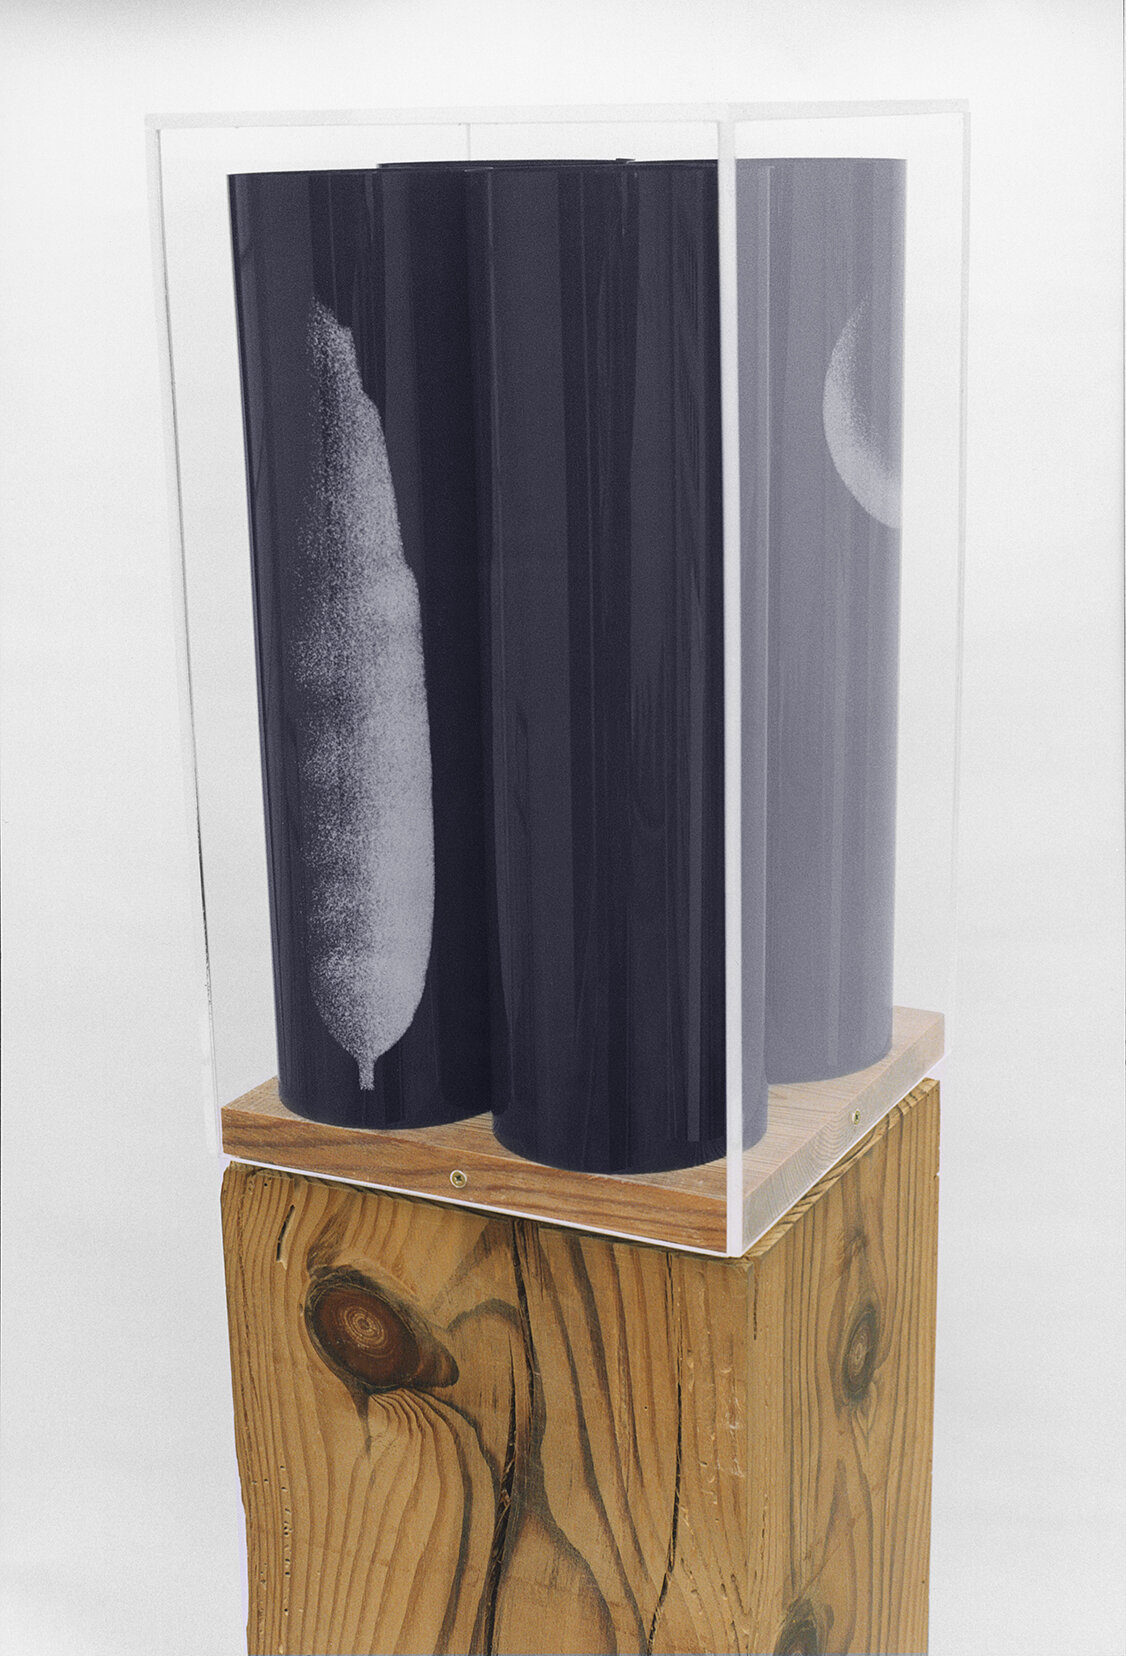  Nocturno, 1999, Acetate, acrylic paint, wood and plexiglass, 71.2 x 9 x 9 inches / 181 x 23 x 23 cm 